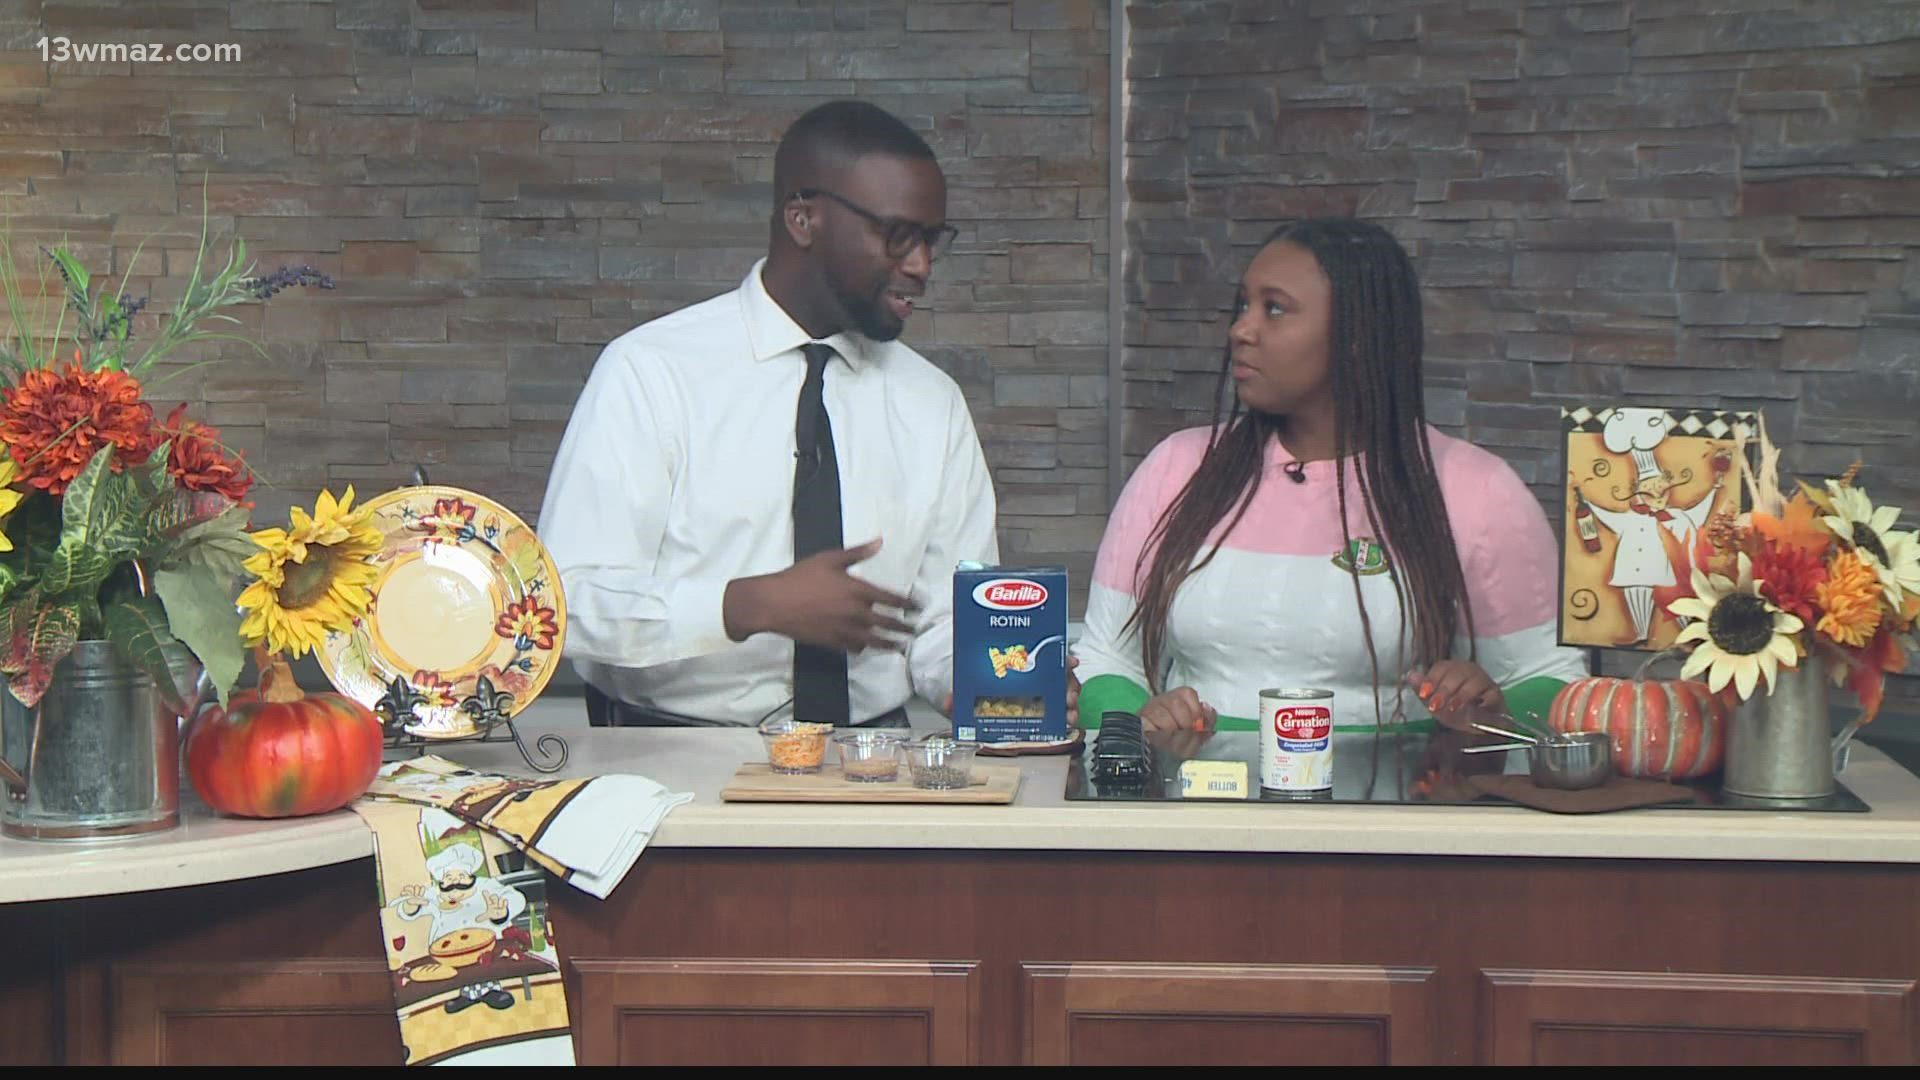 Wanya shares his grandma's recipe for mac 'n' cheese on this episode on of "From Our Table to Yours." Enjoy!